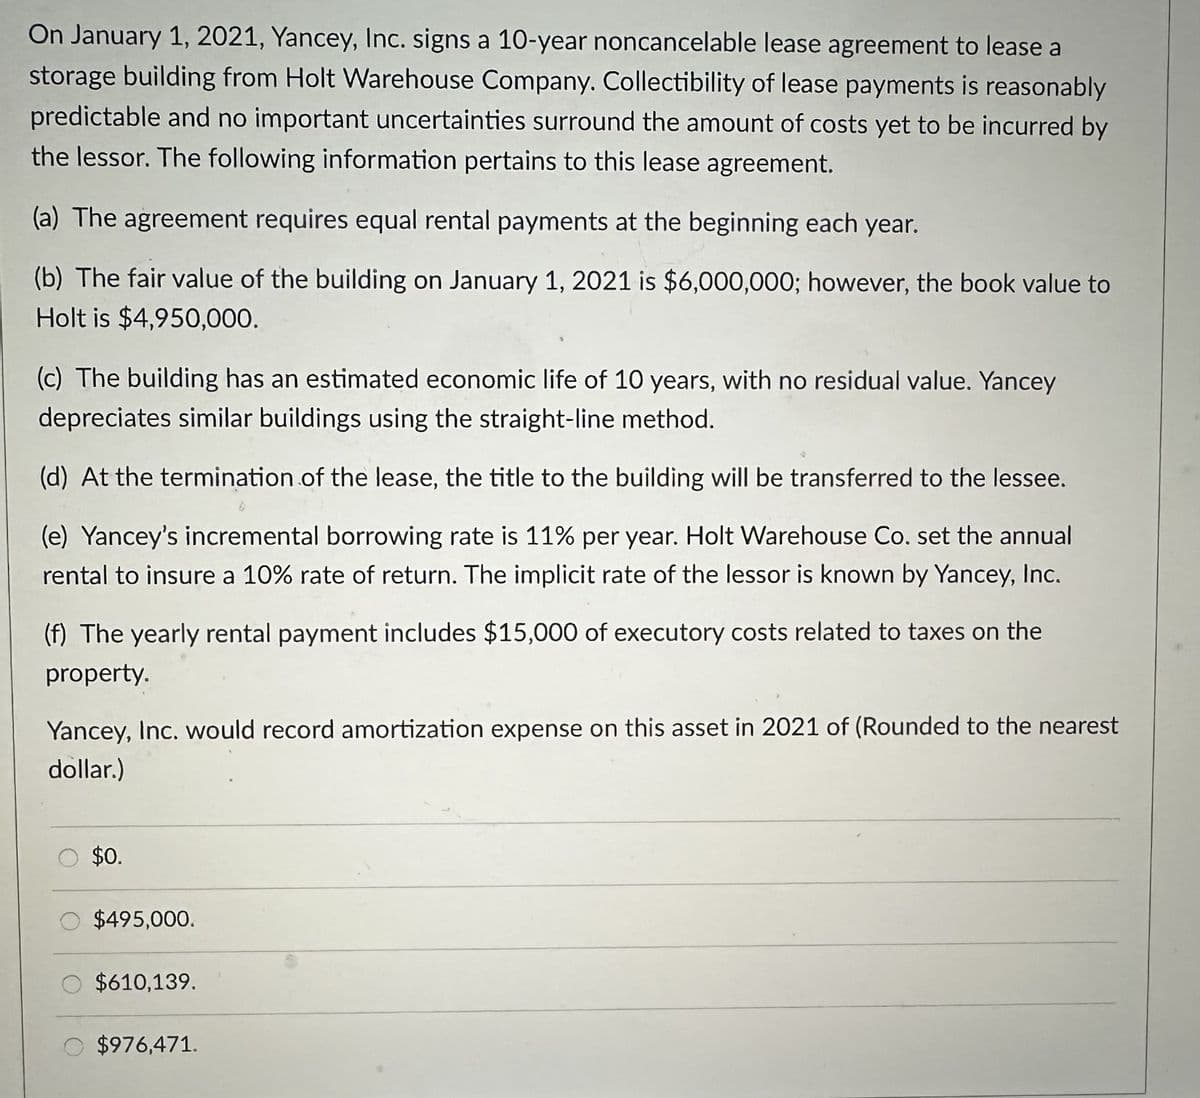 On January 1, 2021, Yancey, Inc. signs a 10-year noncancelable lease agreement to lease a
storage building from Holt Warehouse Company. Collectibility of lease payments is reasonably
predictable and no important uncertainties surround the amount of costs yet to be incurred by
the lessor. The following information pertains to this lease agreement.
(a) The agreement requires equal rental payments at the beginning each year.
(b) The fair value of the building on January 1, 2021 is $6,000,000; however, the book value to
Holt is $4,950,000.
(c) The building has an estimated economic life of 10 years, with no residual value. Yancey
depreciates similar buildings using the straight-line method.
(d) At the termination of the lease, the title to the building will be transferred to the lessee.
(e) Yancey's incremental borrowing rate is 11% per year. Holt Warehouse Co. set the annual
rental to insure a 10% rate of return. The implicit rate of the lessor is known by Yancey, Inc.
(f) The yearly rental payment includes $15,000 of executory costs related to taxes on the
property.
Yancey, Inc. would record amortization expense on this asset in 2021 of (Rounded to the nearest
dollar.)
$0.
$495,000.
$610,139.
$976,471.